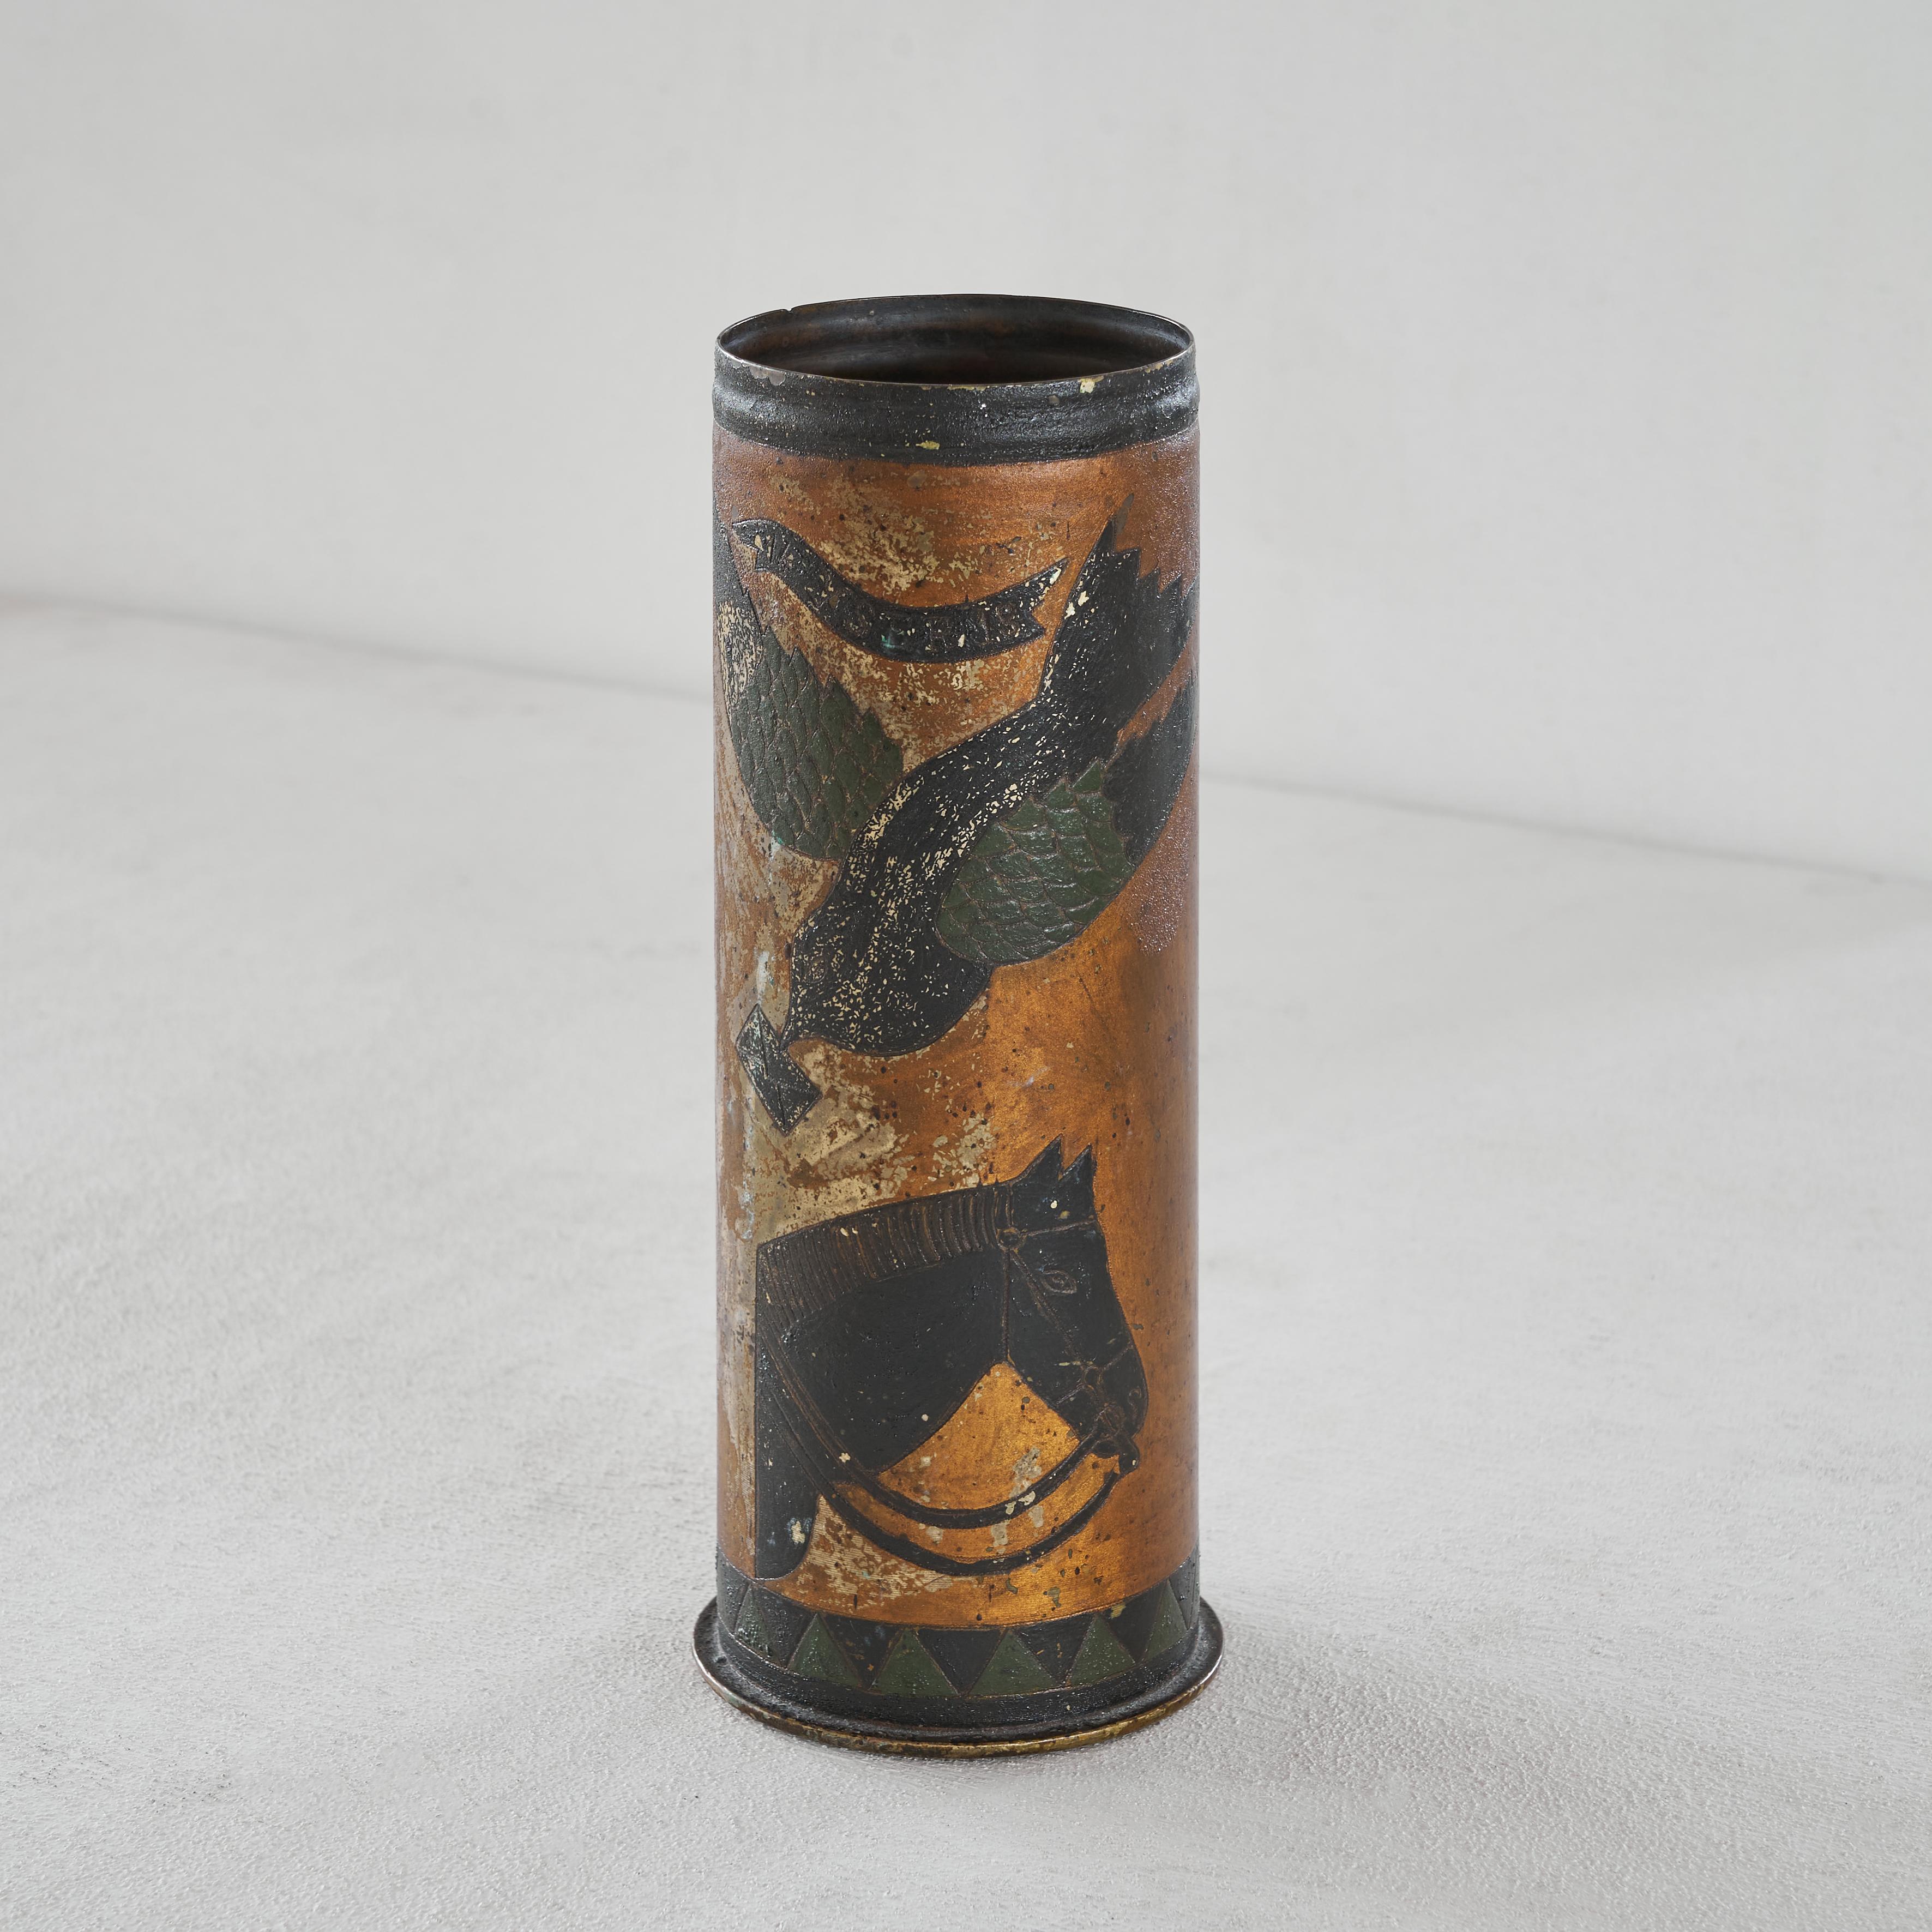 Rare and unusual piece of trench art from World War I (1914-1918), Belgium.

Trench art was made during or after WW1. Soldiers used metal and used bombshells from the battlefields to make art and memorabilia. 

This is a genuine bombshell from